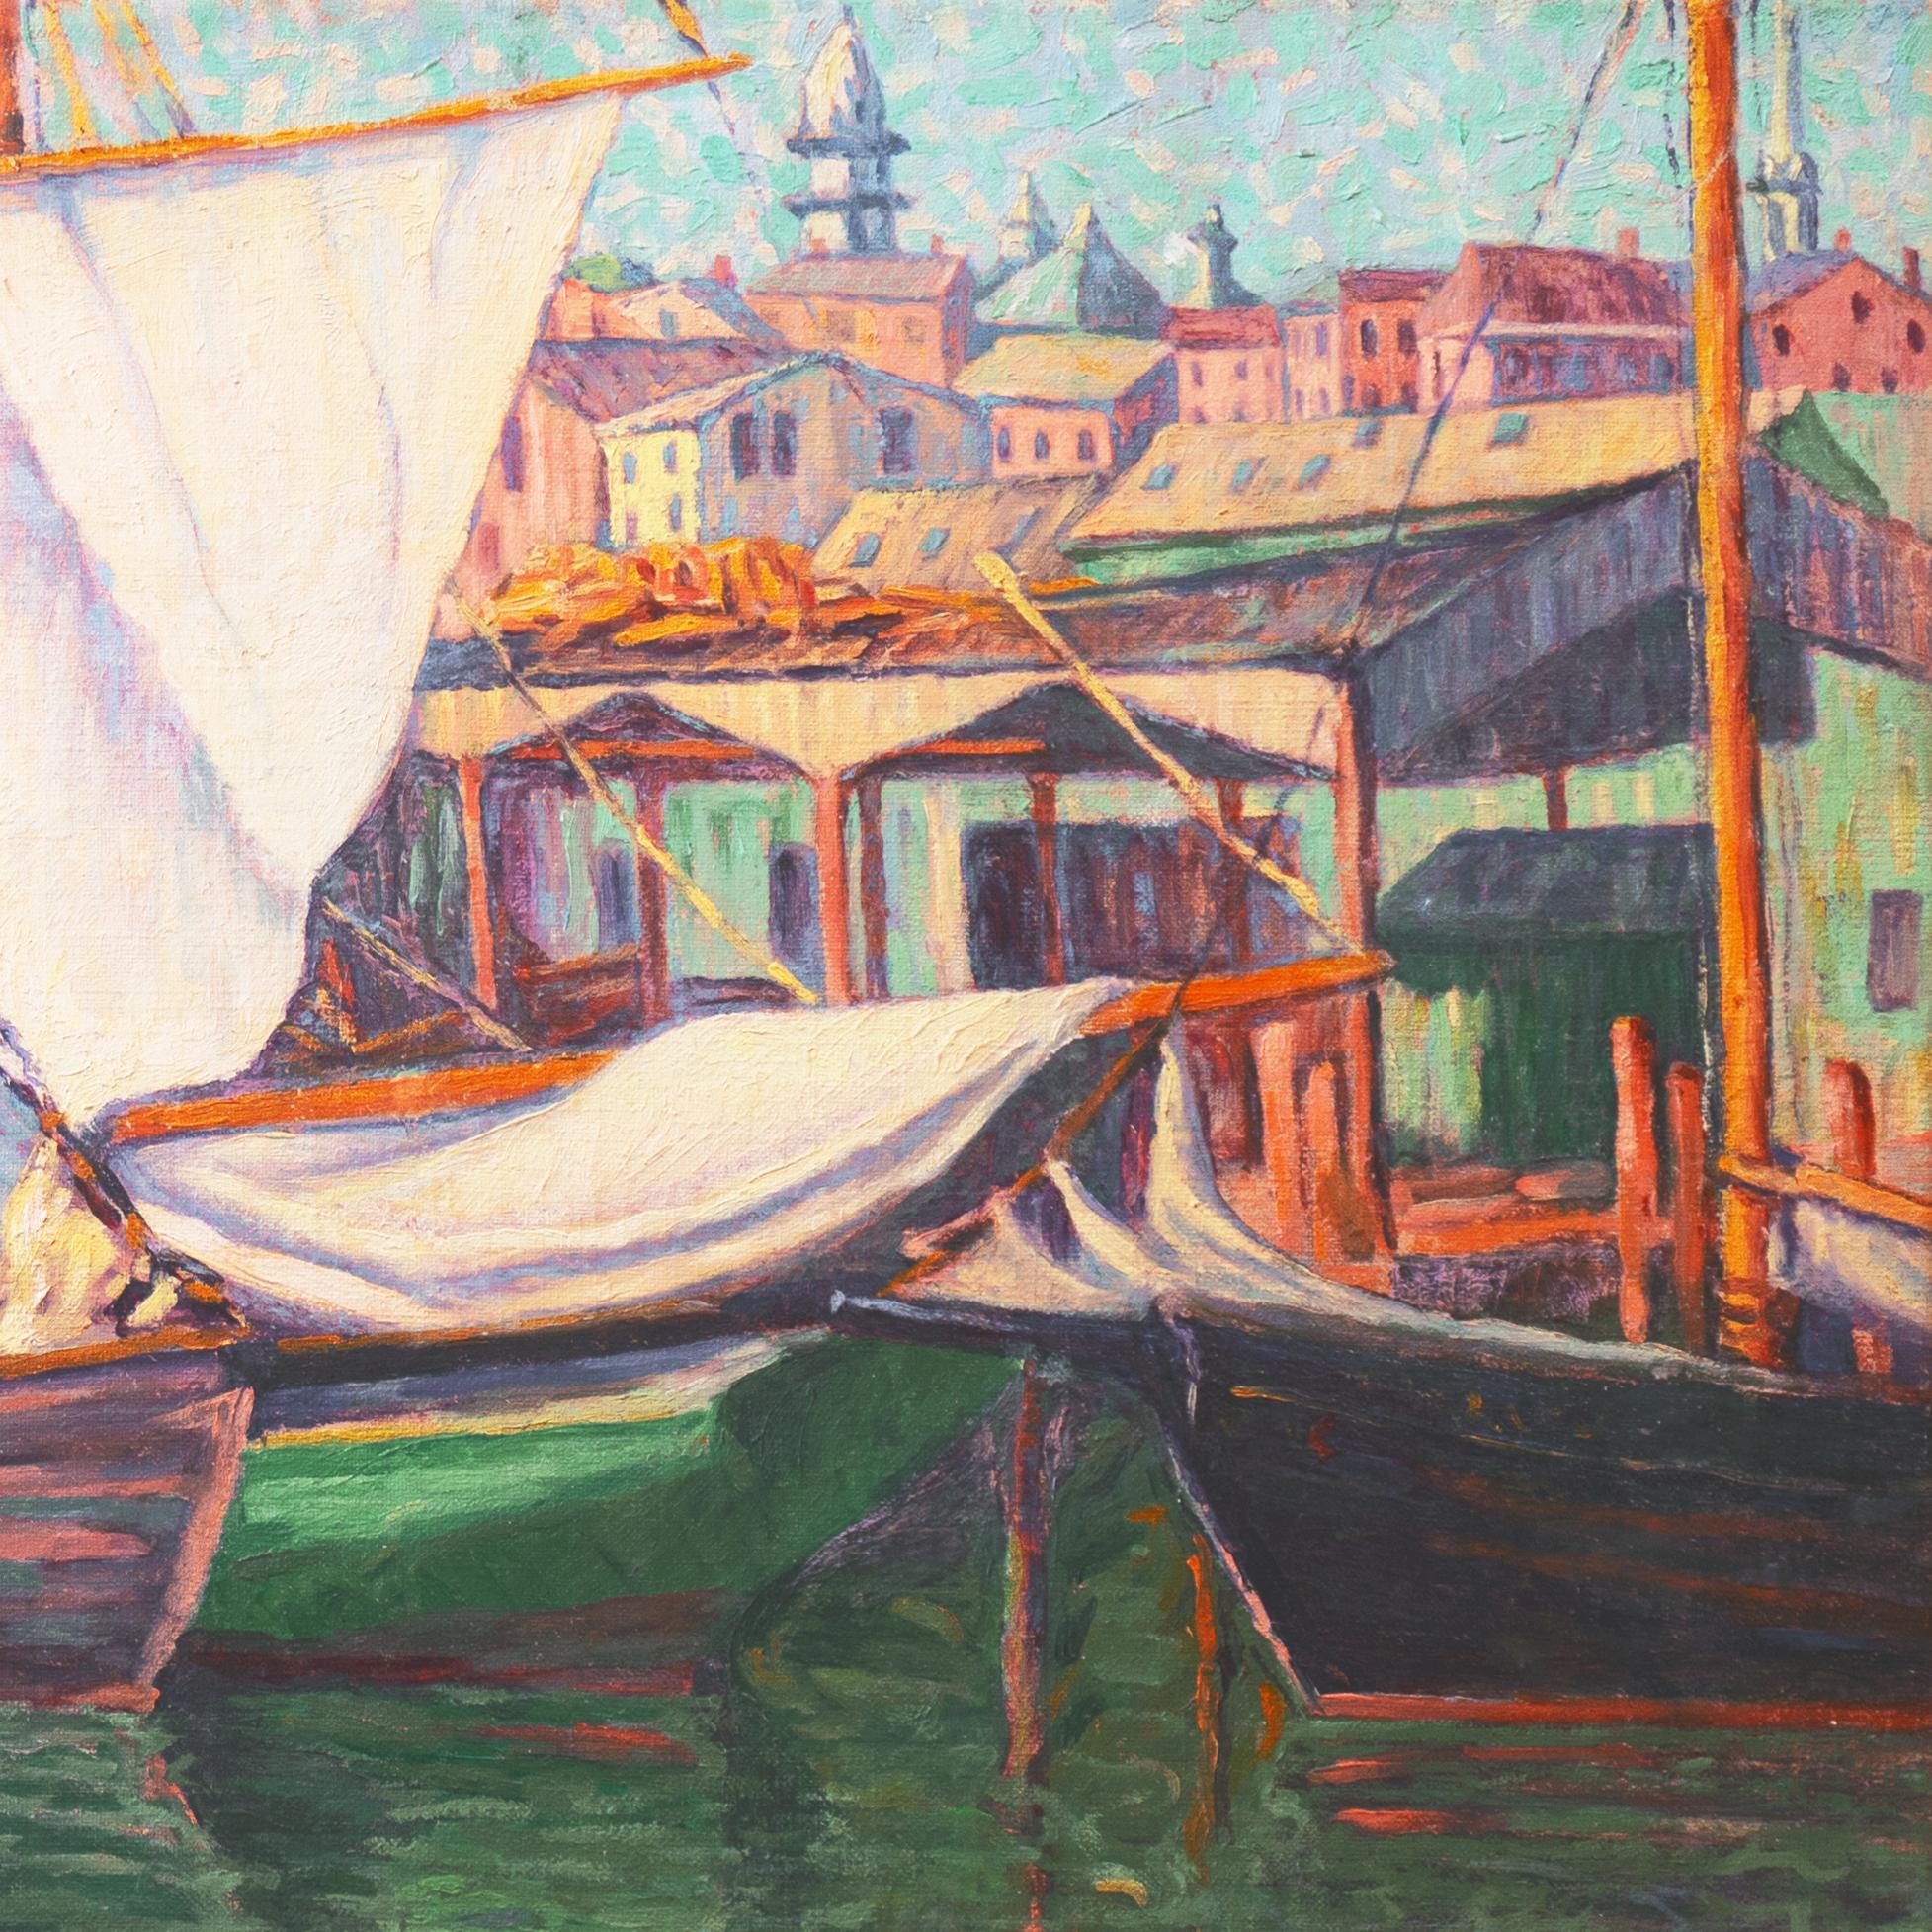 'Fishing Boats in Harbor', American School Oil, Oakland, San Francisco Bay Area - Brown Landscape Painting by American School (20th century)